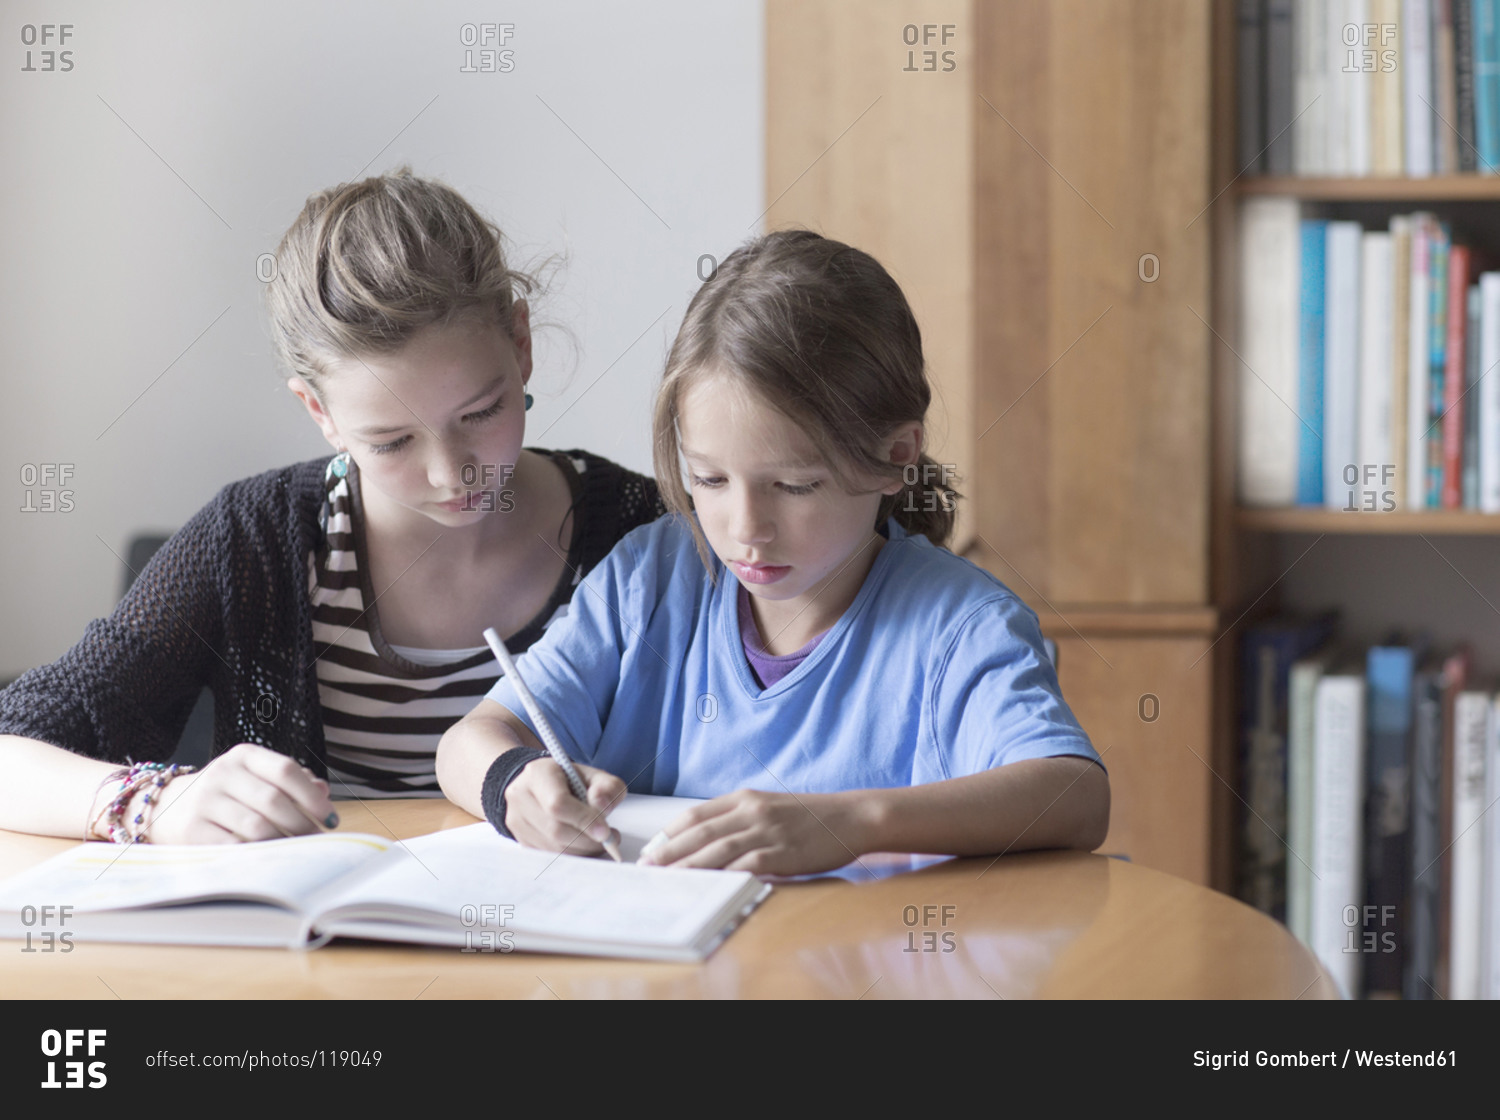 Sister helping her little brother by doing his homework